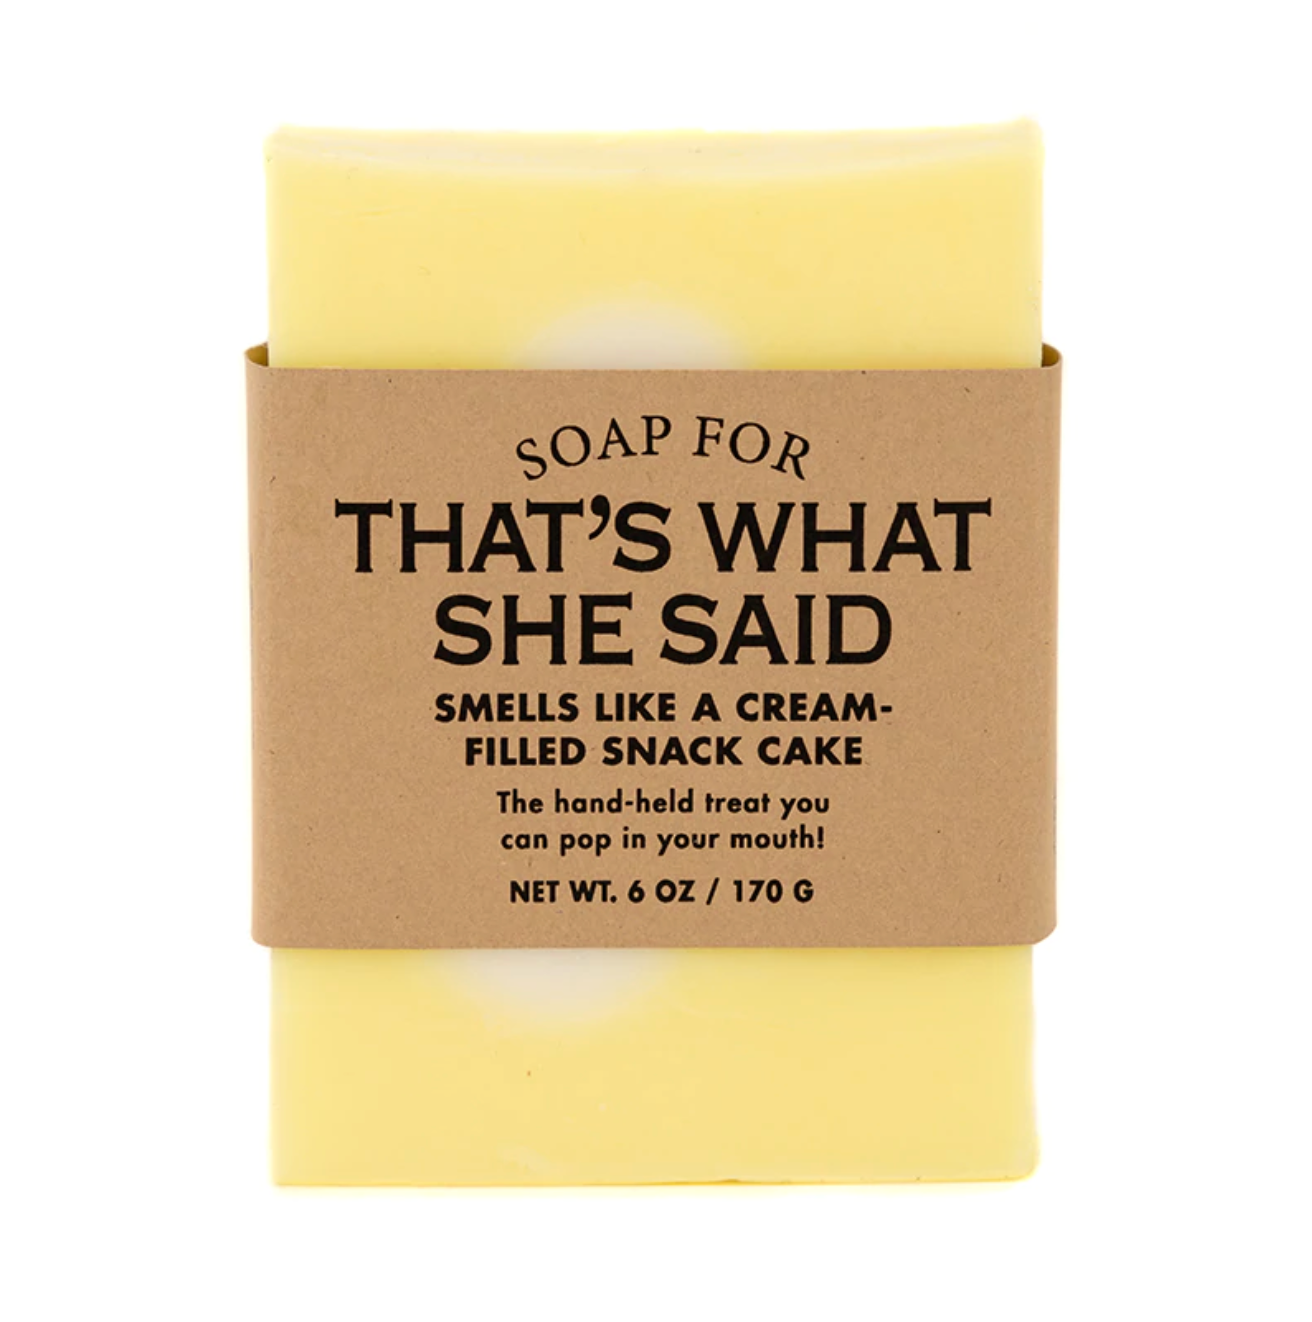 Soap for That's What She Said - Heart of the Home PA